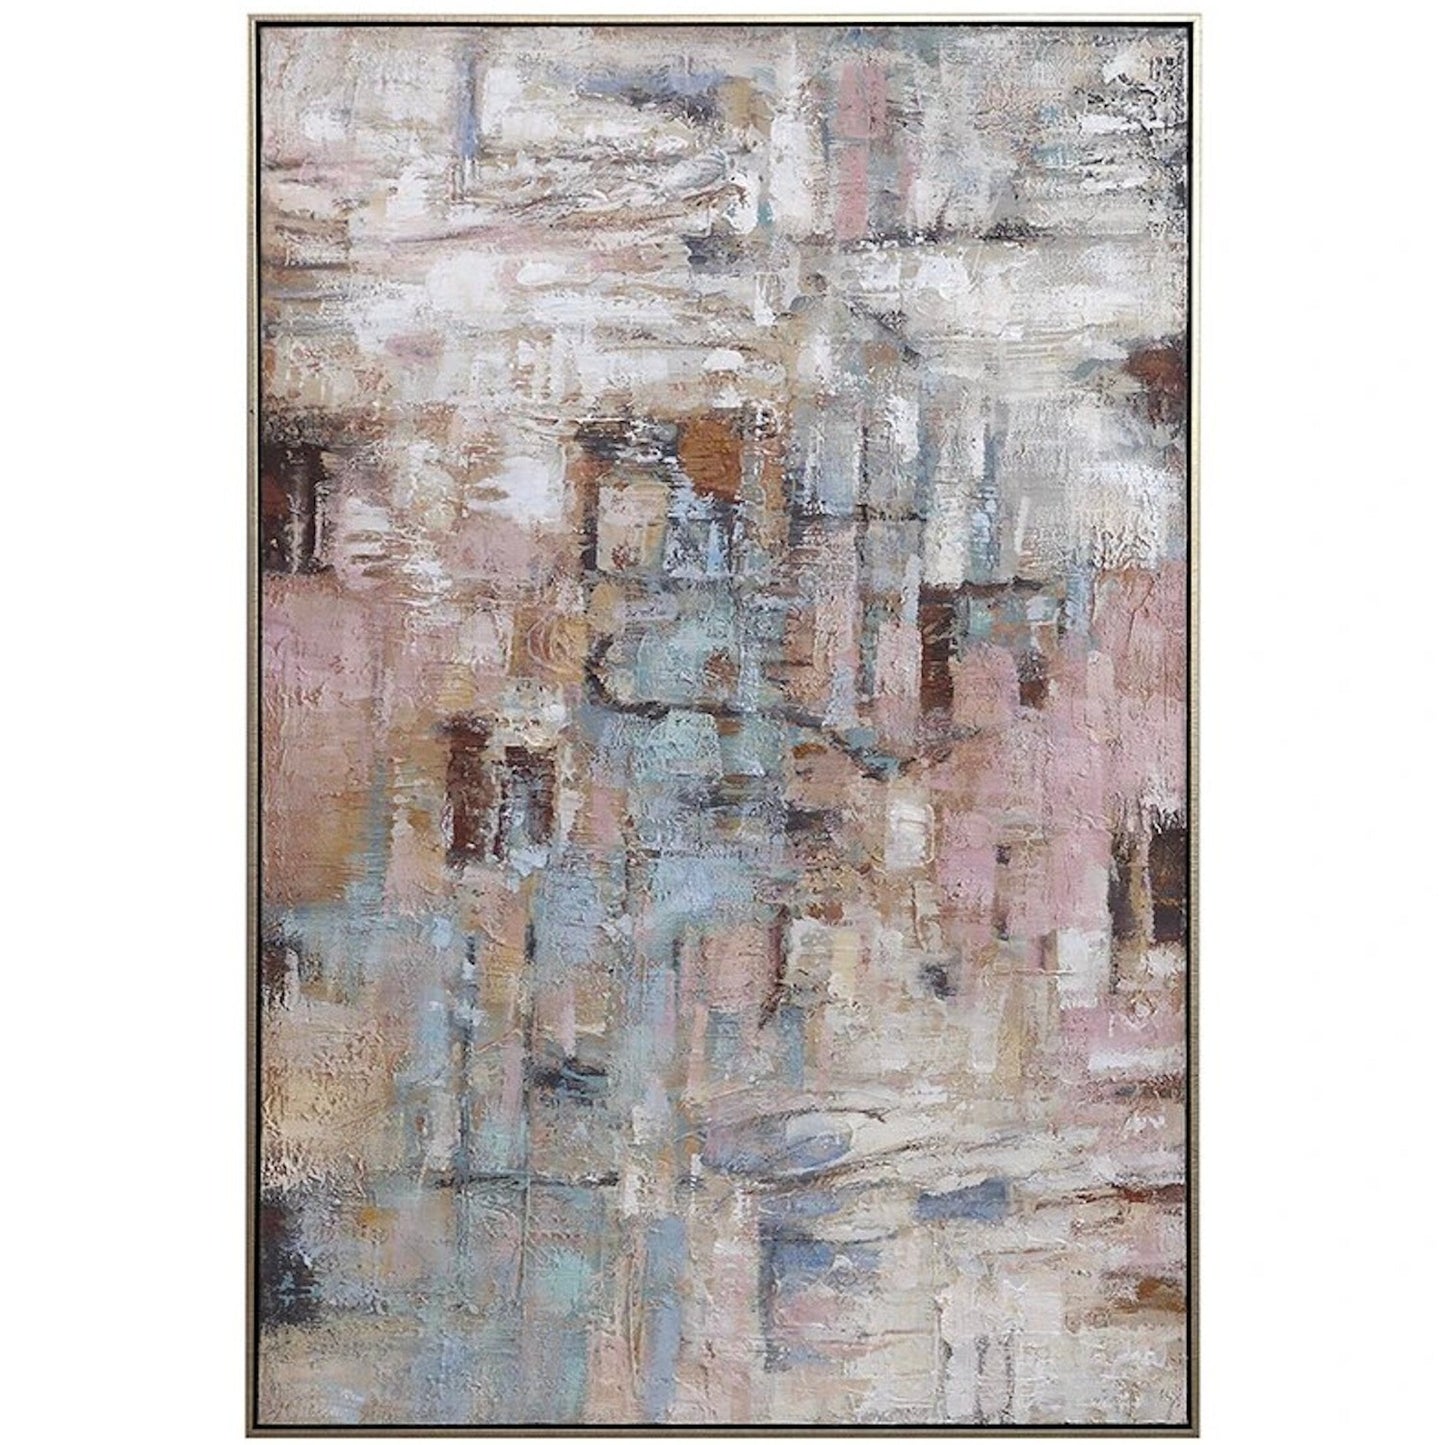 Delicate 100% Hand Painted Abstract Oil Painting